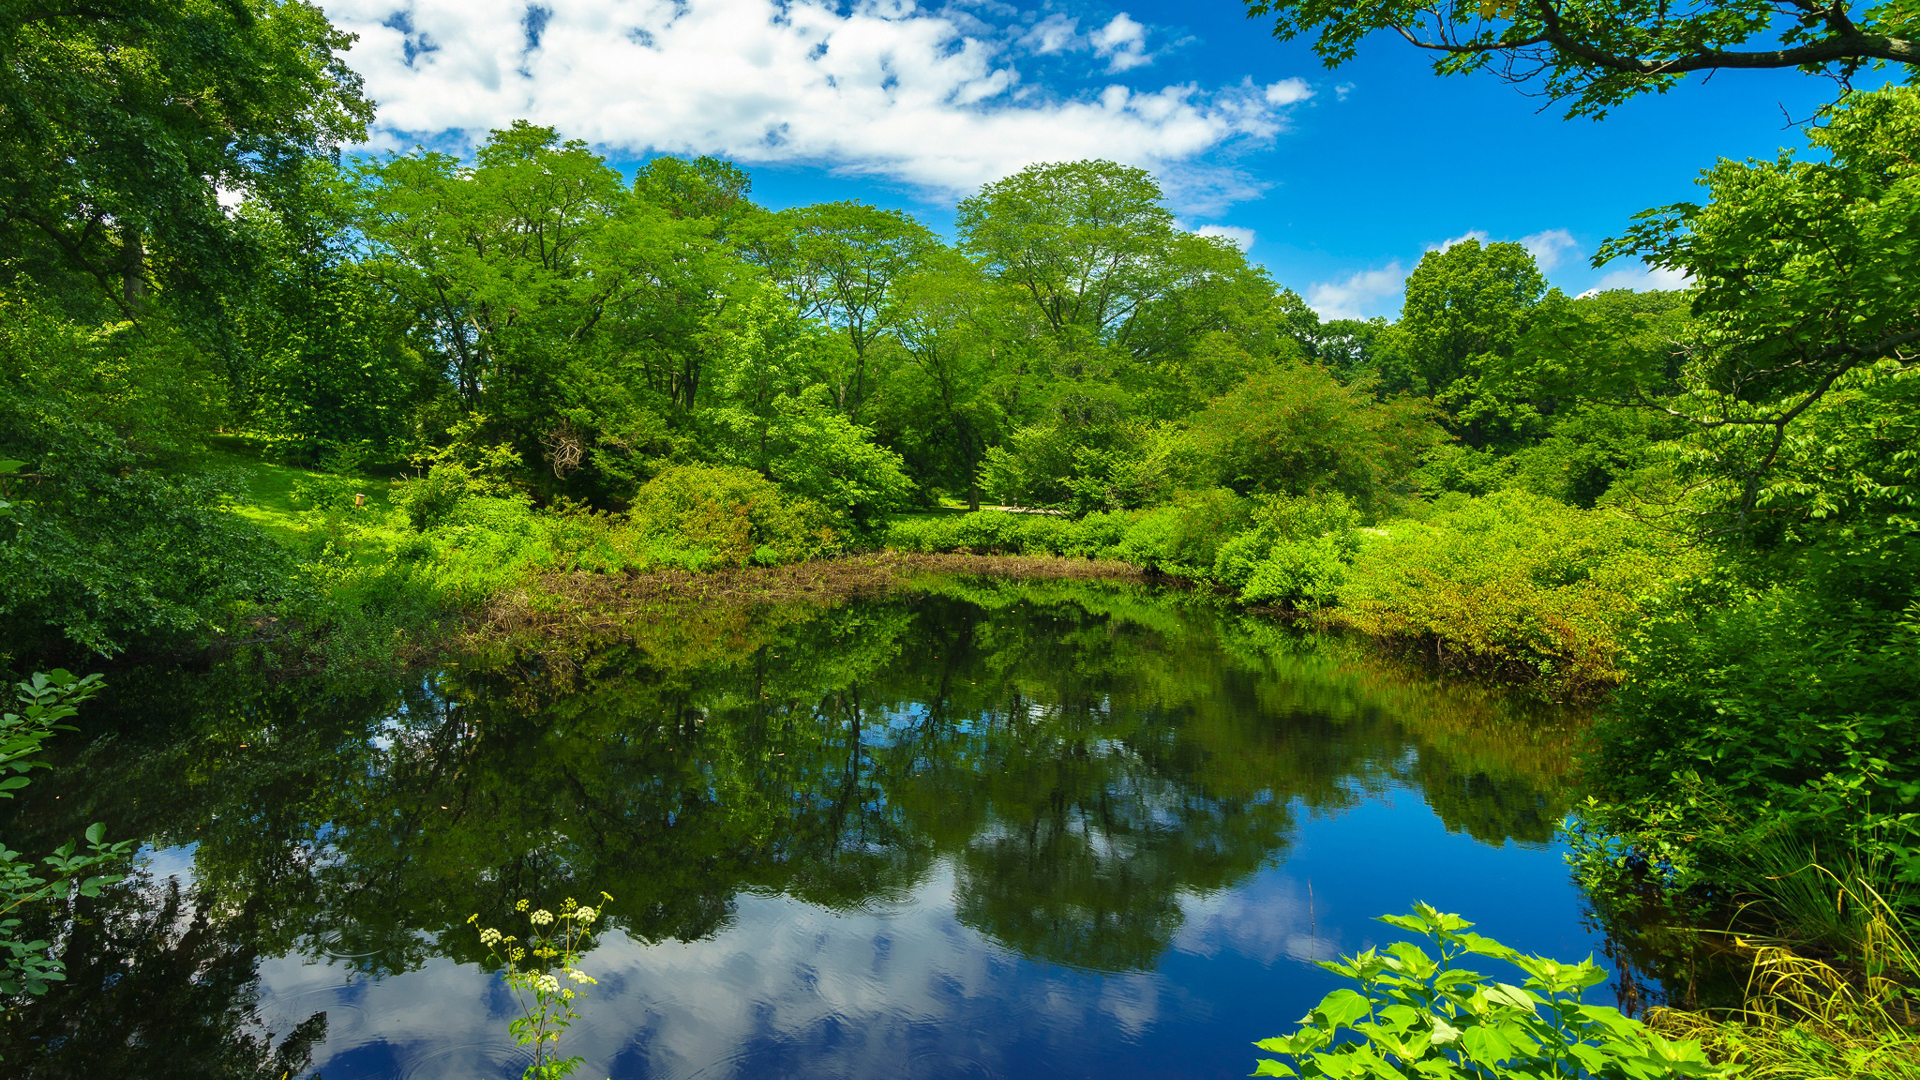 Boston Greenery Massachusetts Park And Pond With Reflection Of Trees Clouds And Blue Sky HD Nature